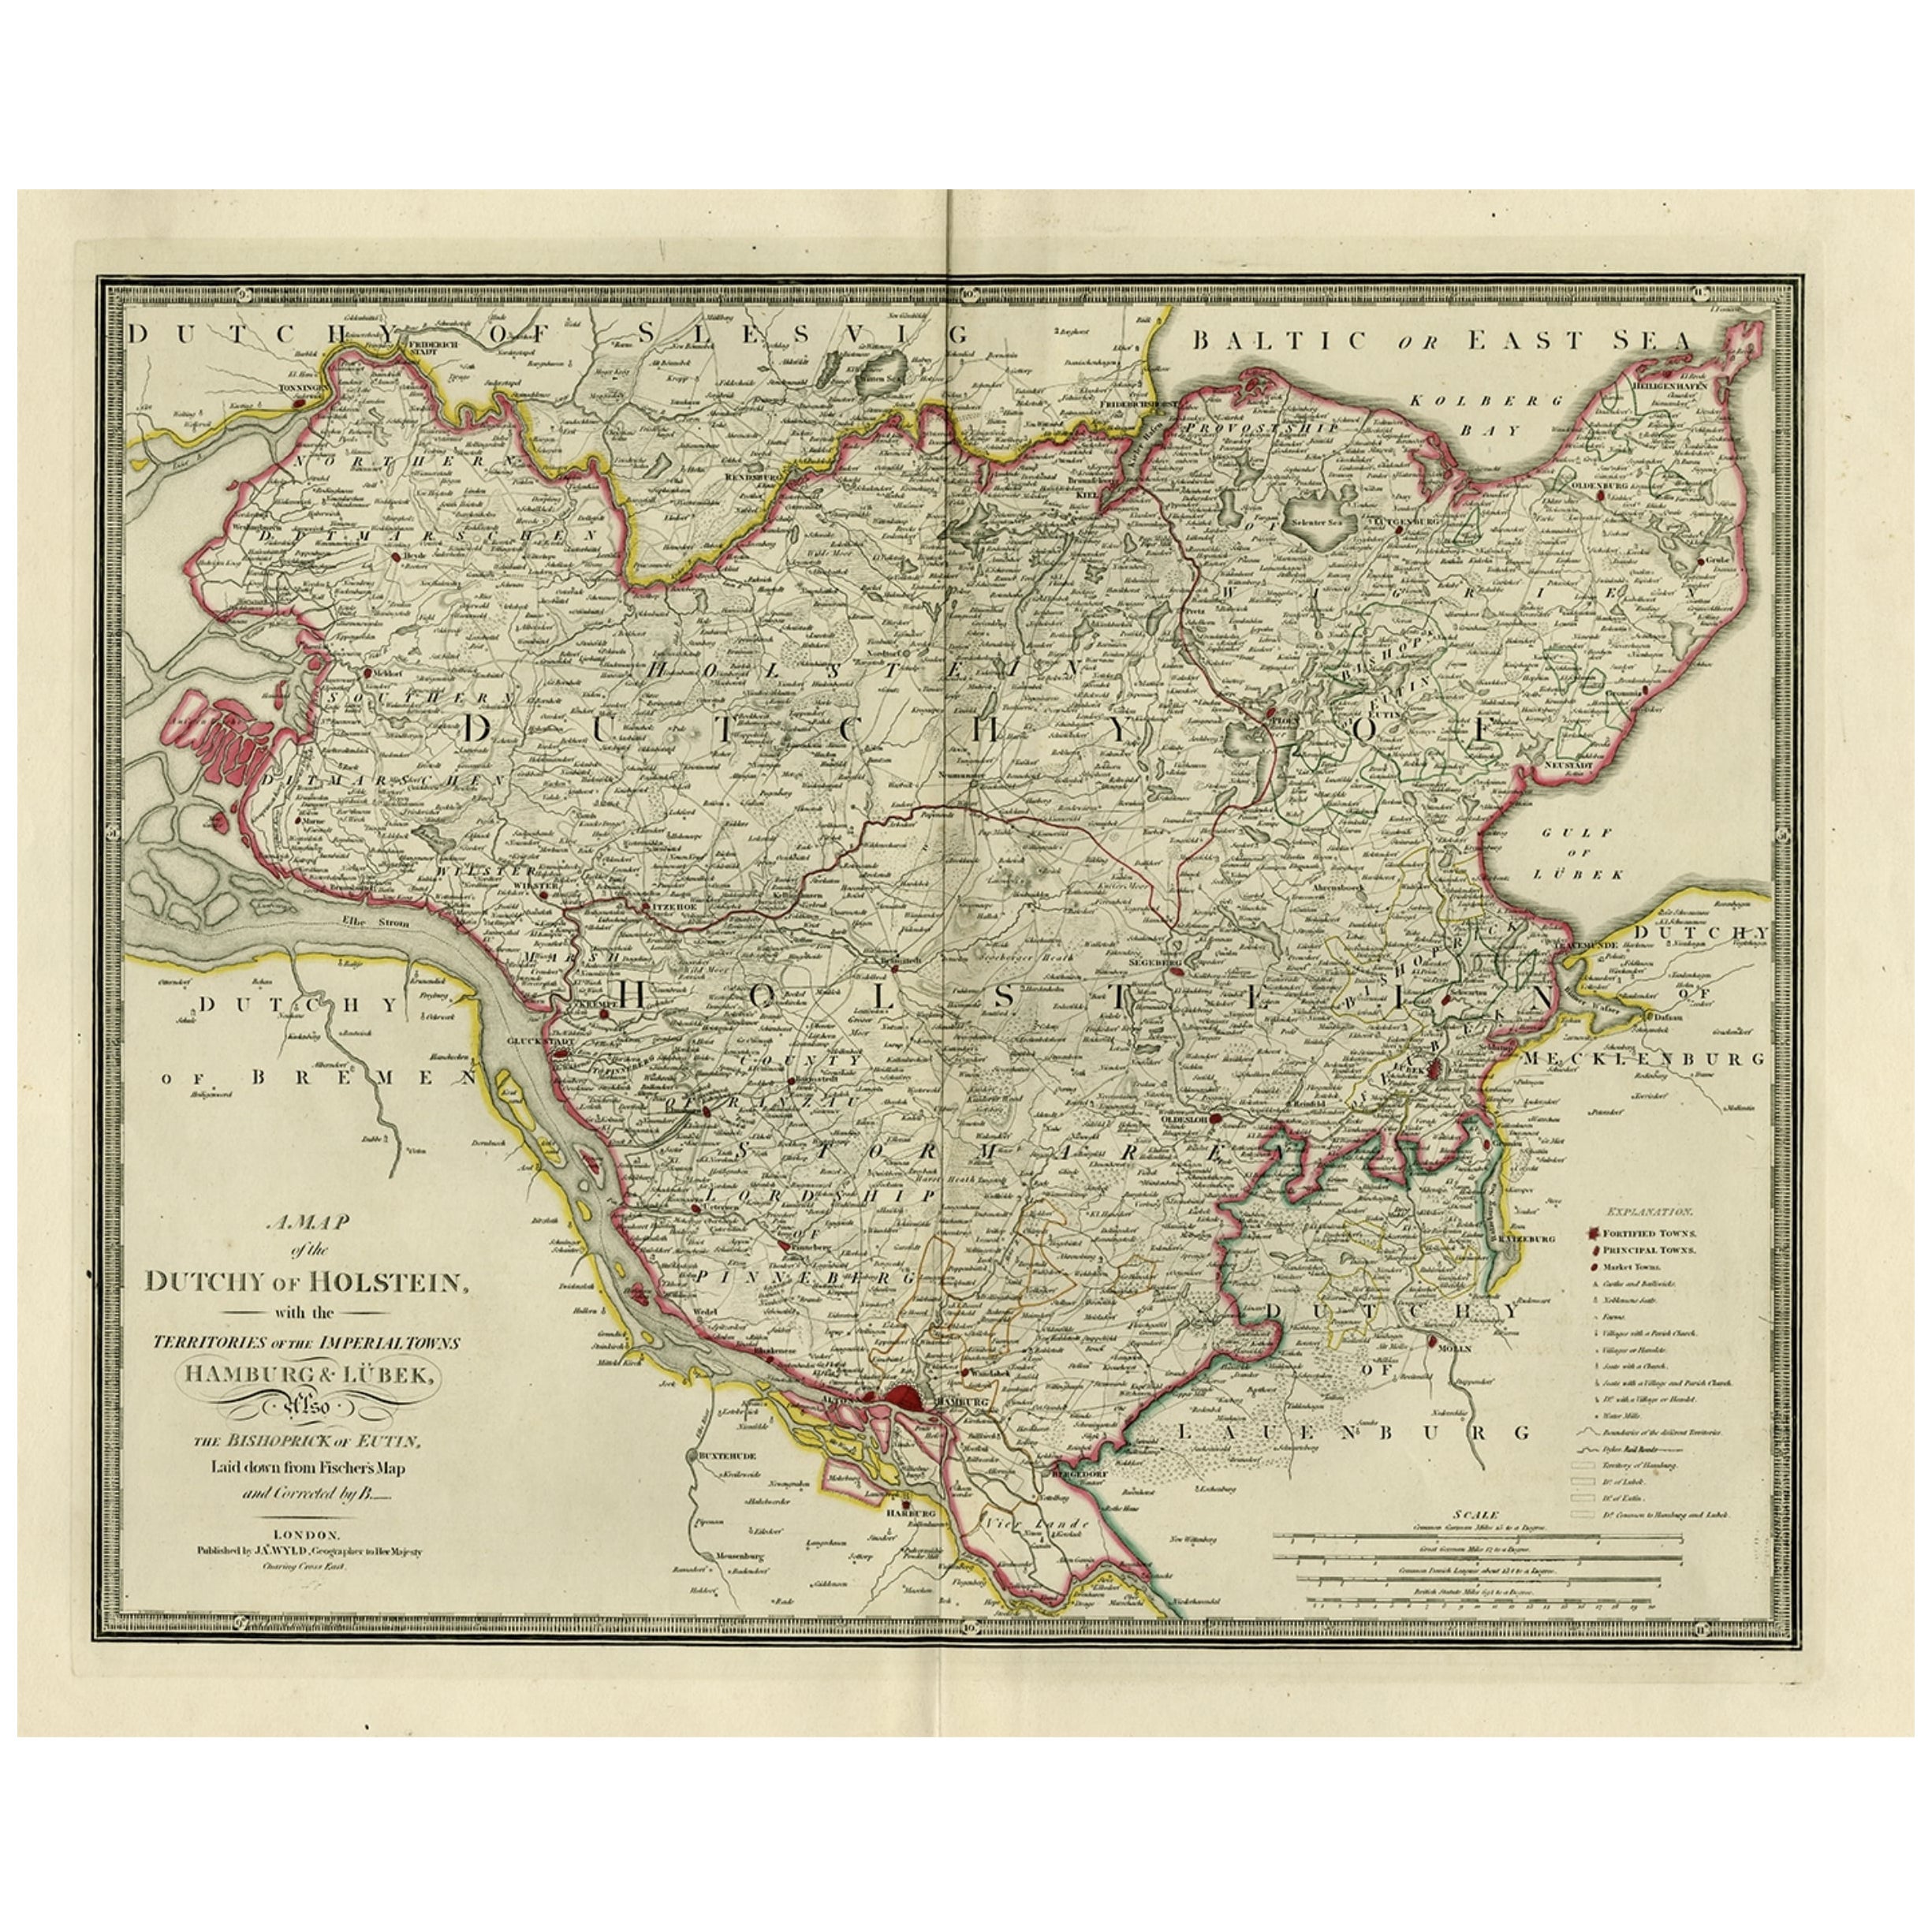 Old Map of Holstein with the Imperial Towns Hamburg & Lubeck, Germany, 1854 For Sale